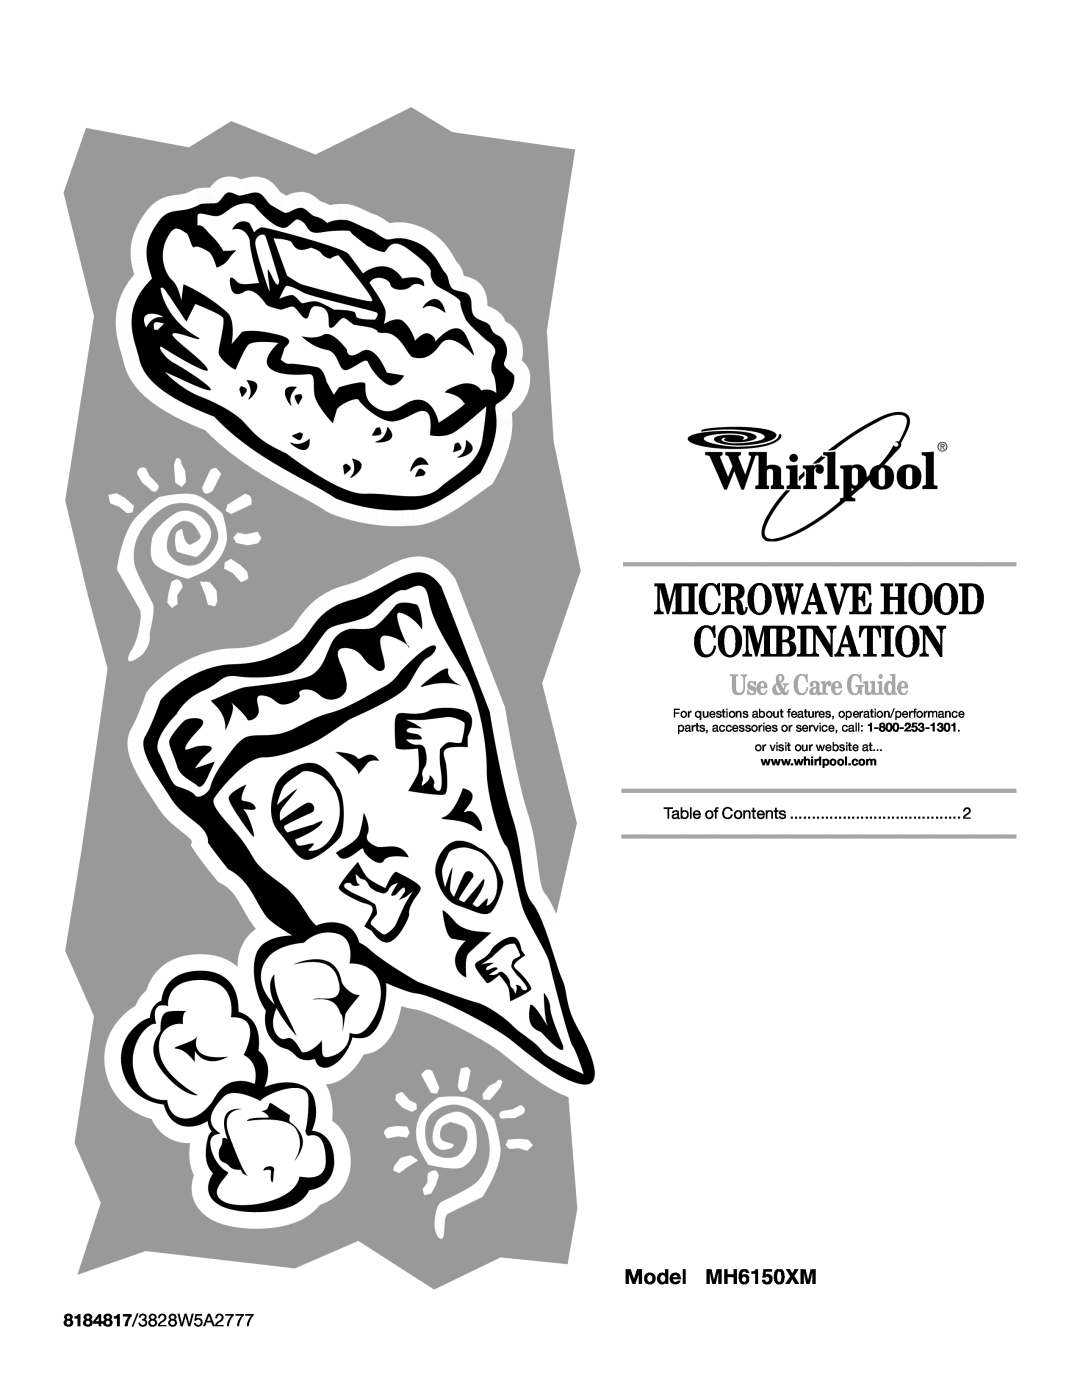 Whirlpool manual Microwave Hood Combination, Use & Care Guide, Model MH6150XM, or visit our website at 